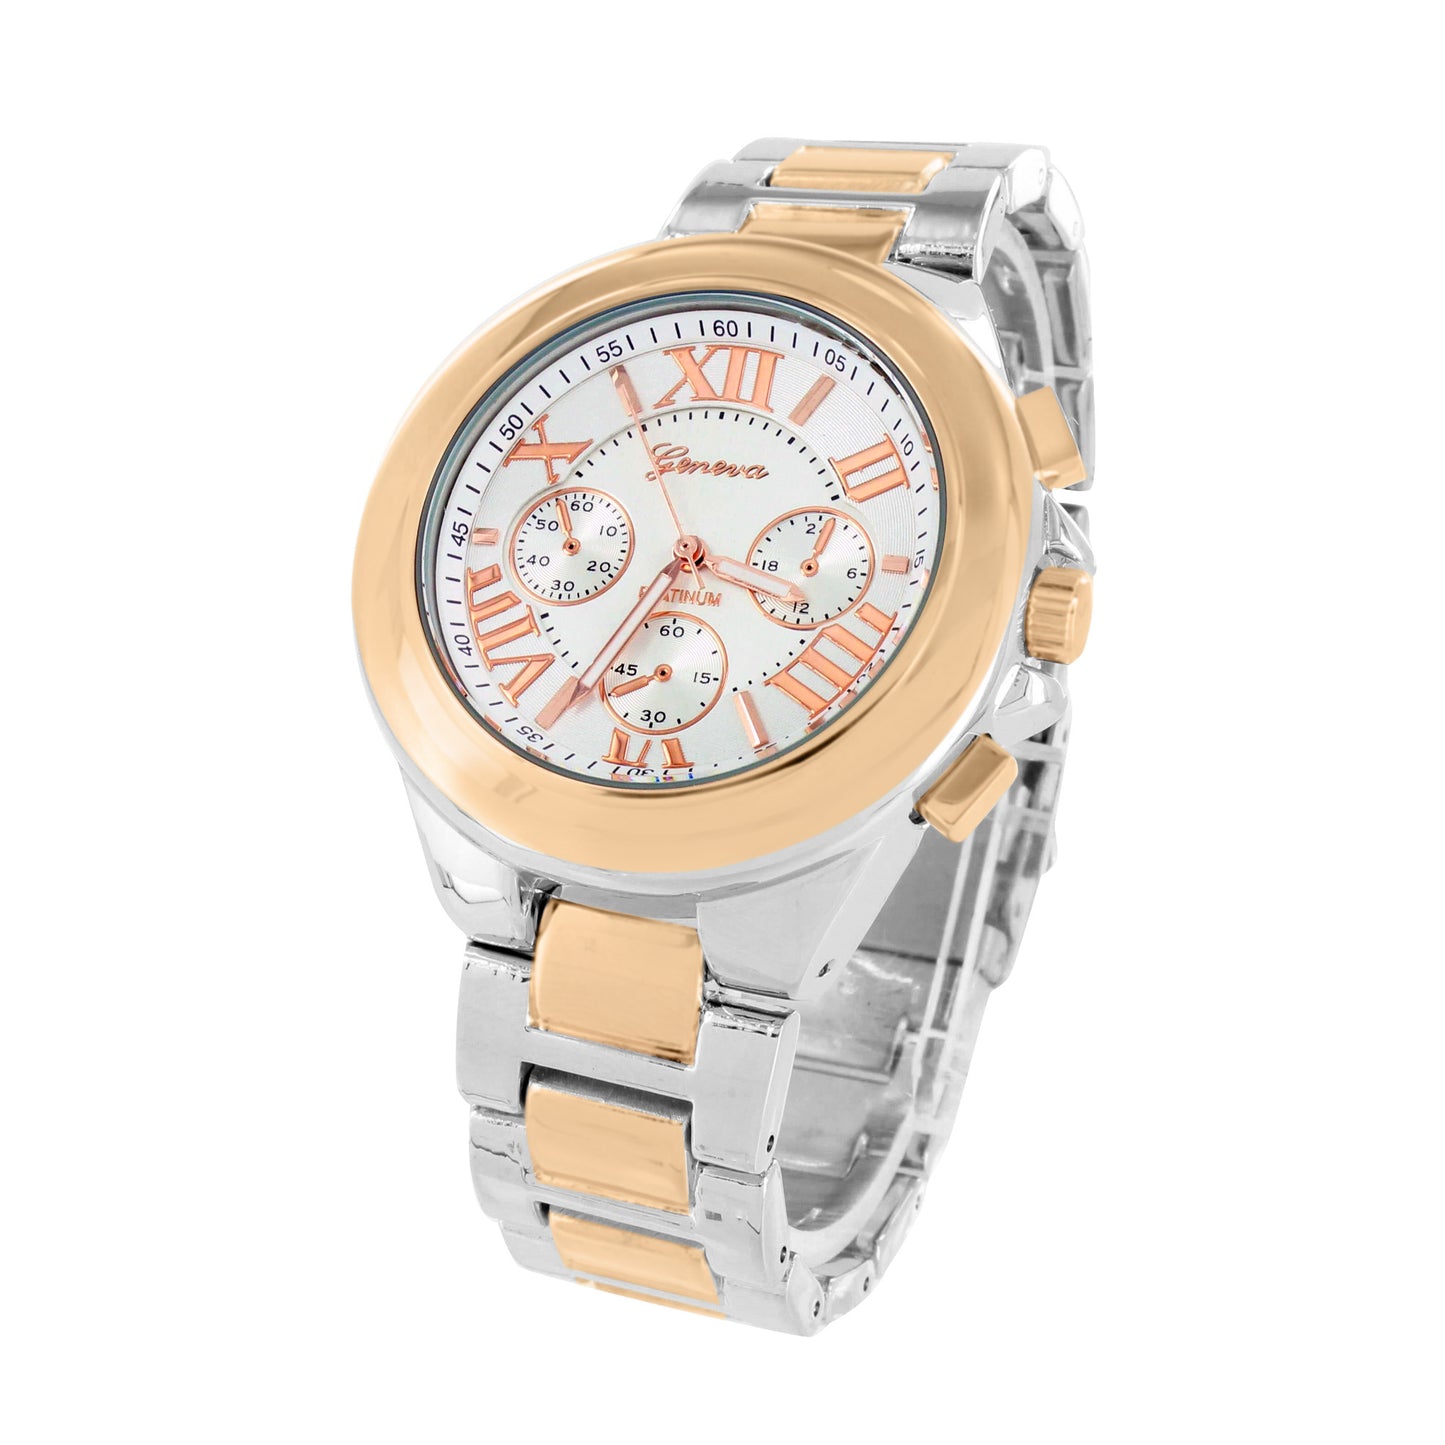 Classy 2 Tone Unisex Watch White Rose Gold Tone Roman Numeral Dial